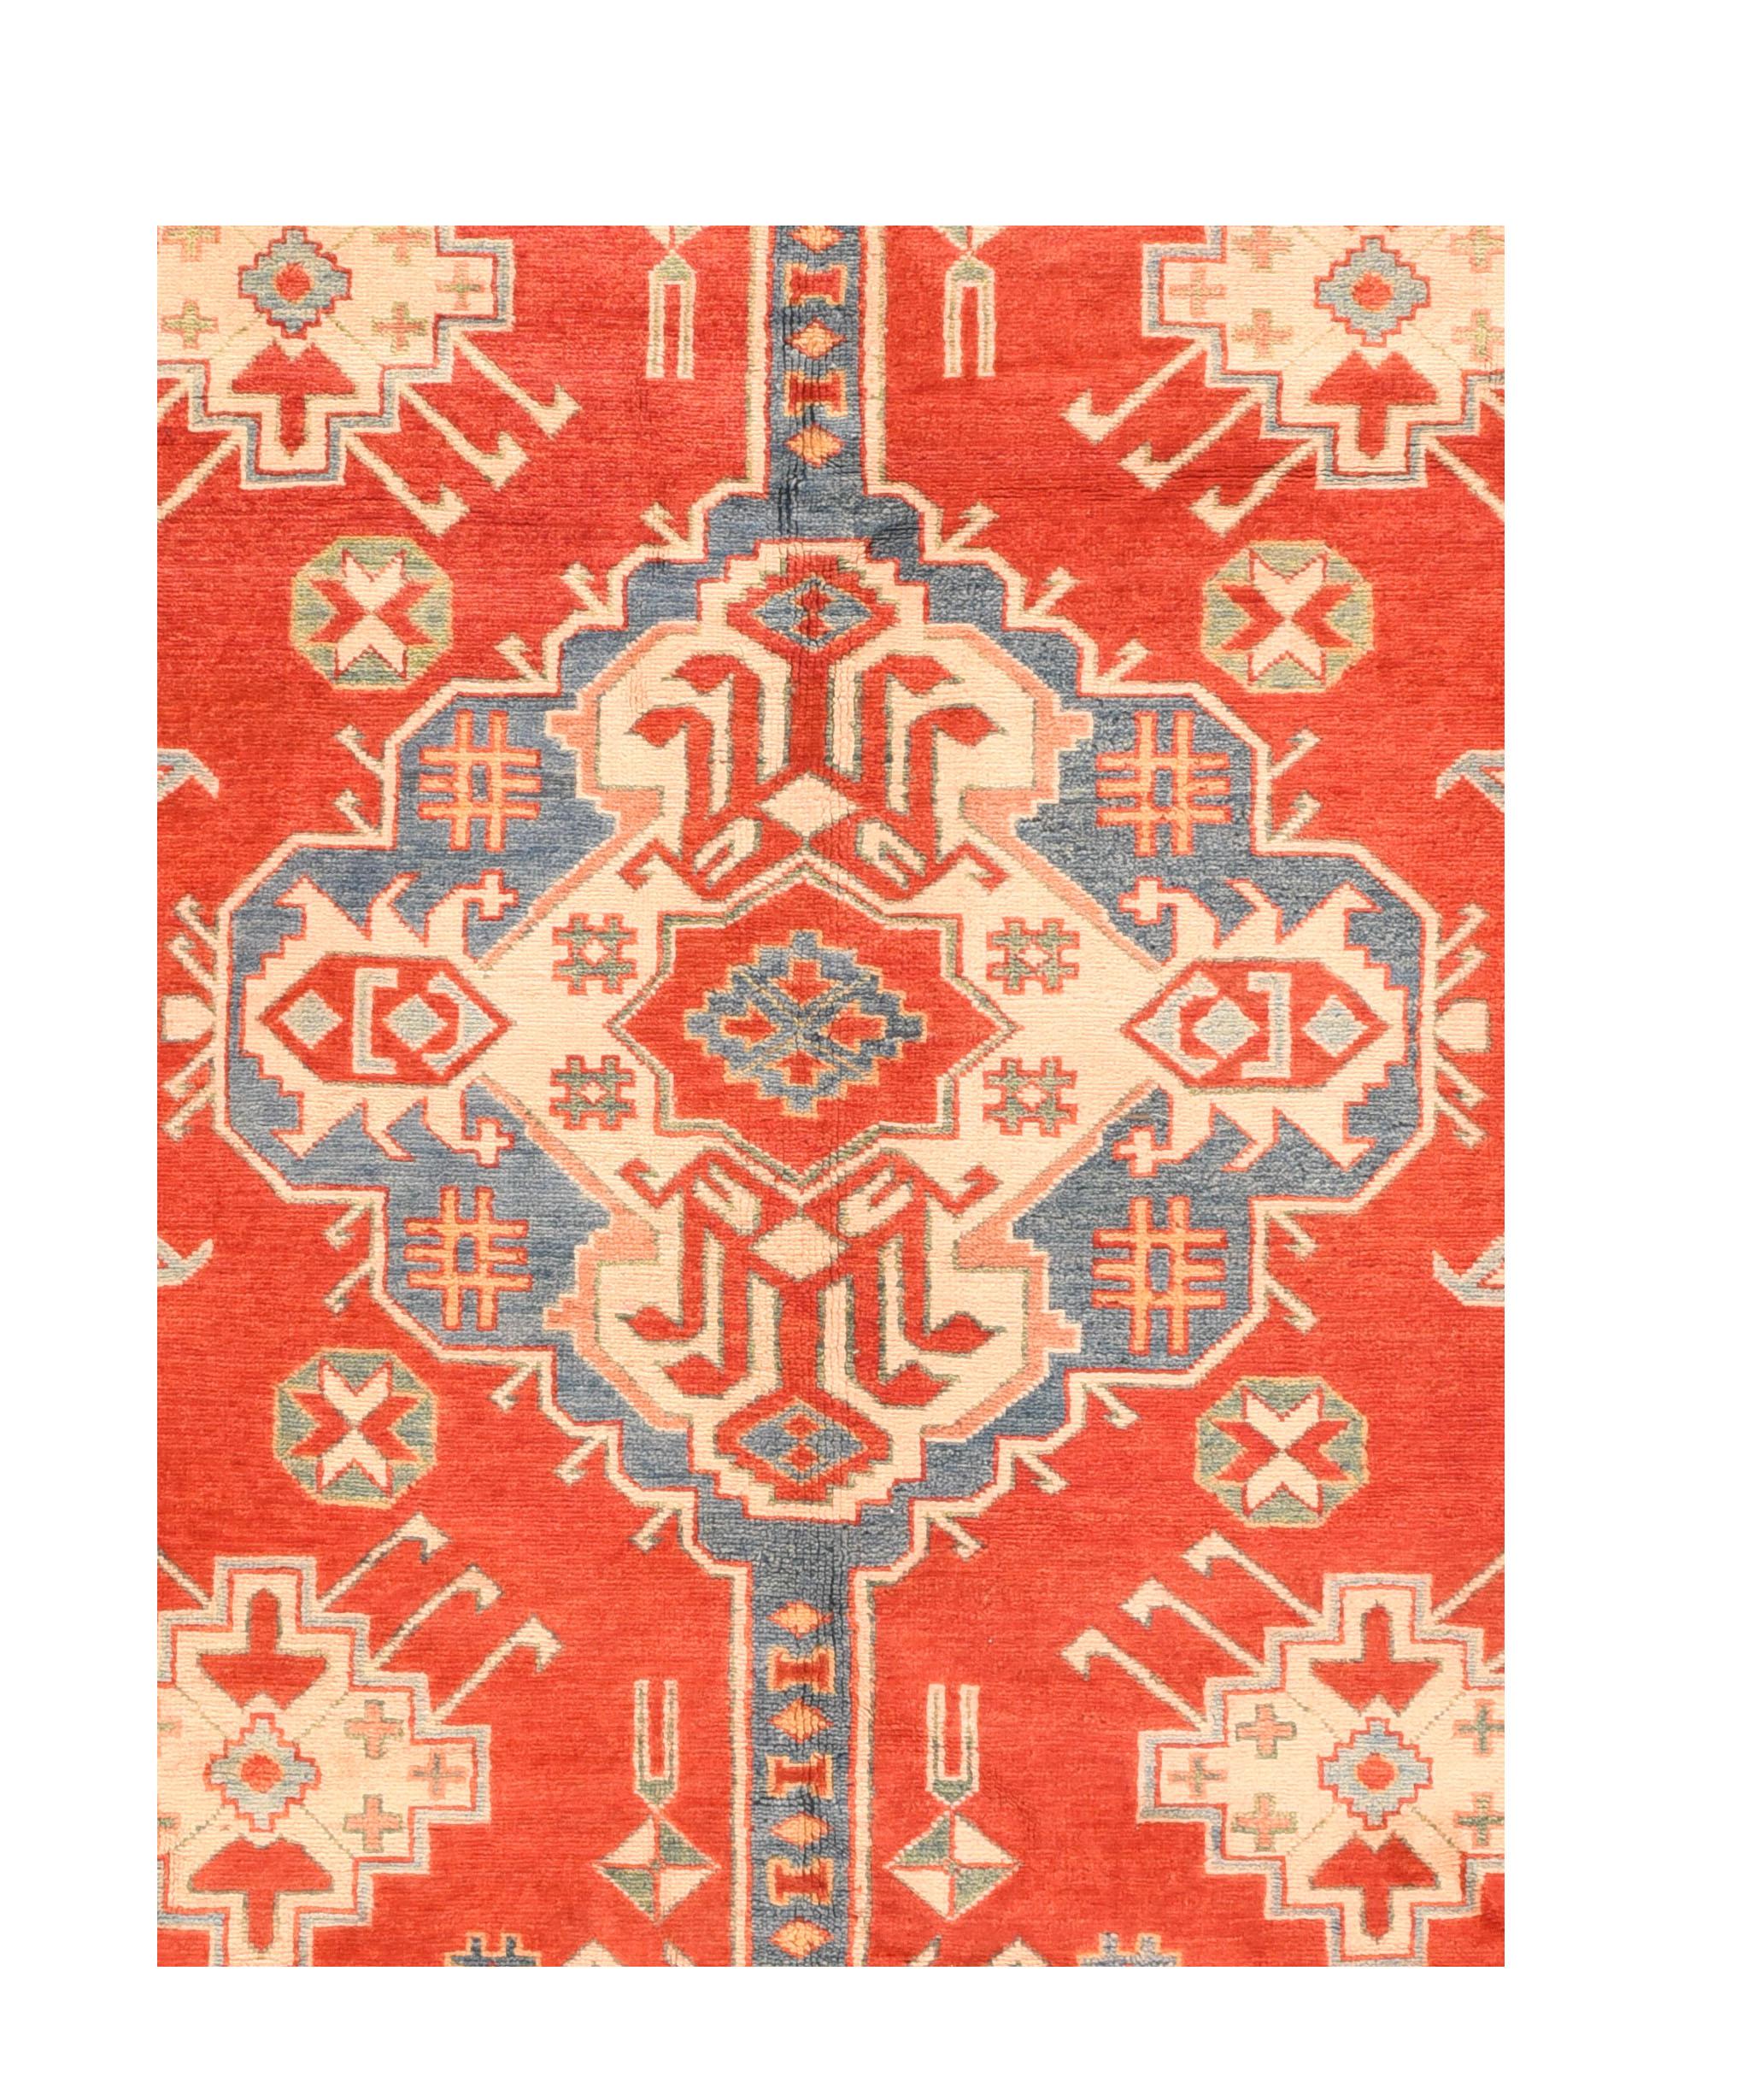 Fine Pak Kazak Pakistan rug, hand knotted

Design: Floral

A Pakistani rug (Pak Persian rug or Pakistani carpet) is a type of handmade floor-covering textile traditionally made in Pakistan.

The manufacturing of carpets in Pakistan began in